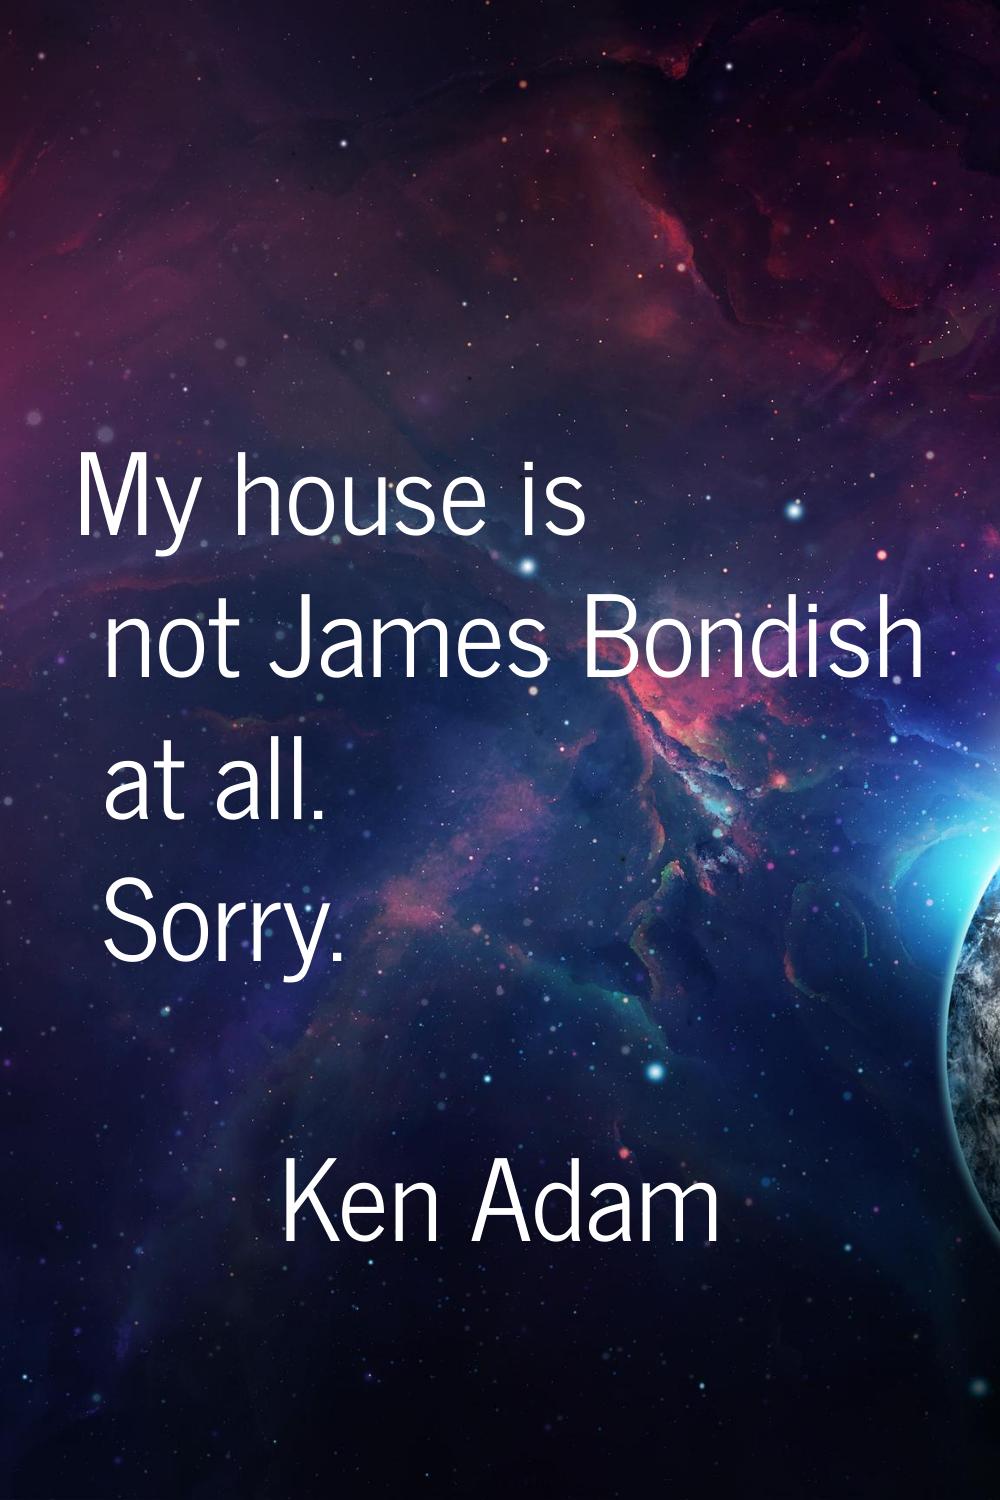 My house is not James Bondish at all. Sorry.